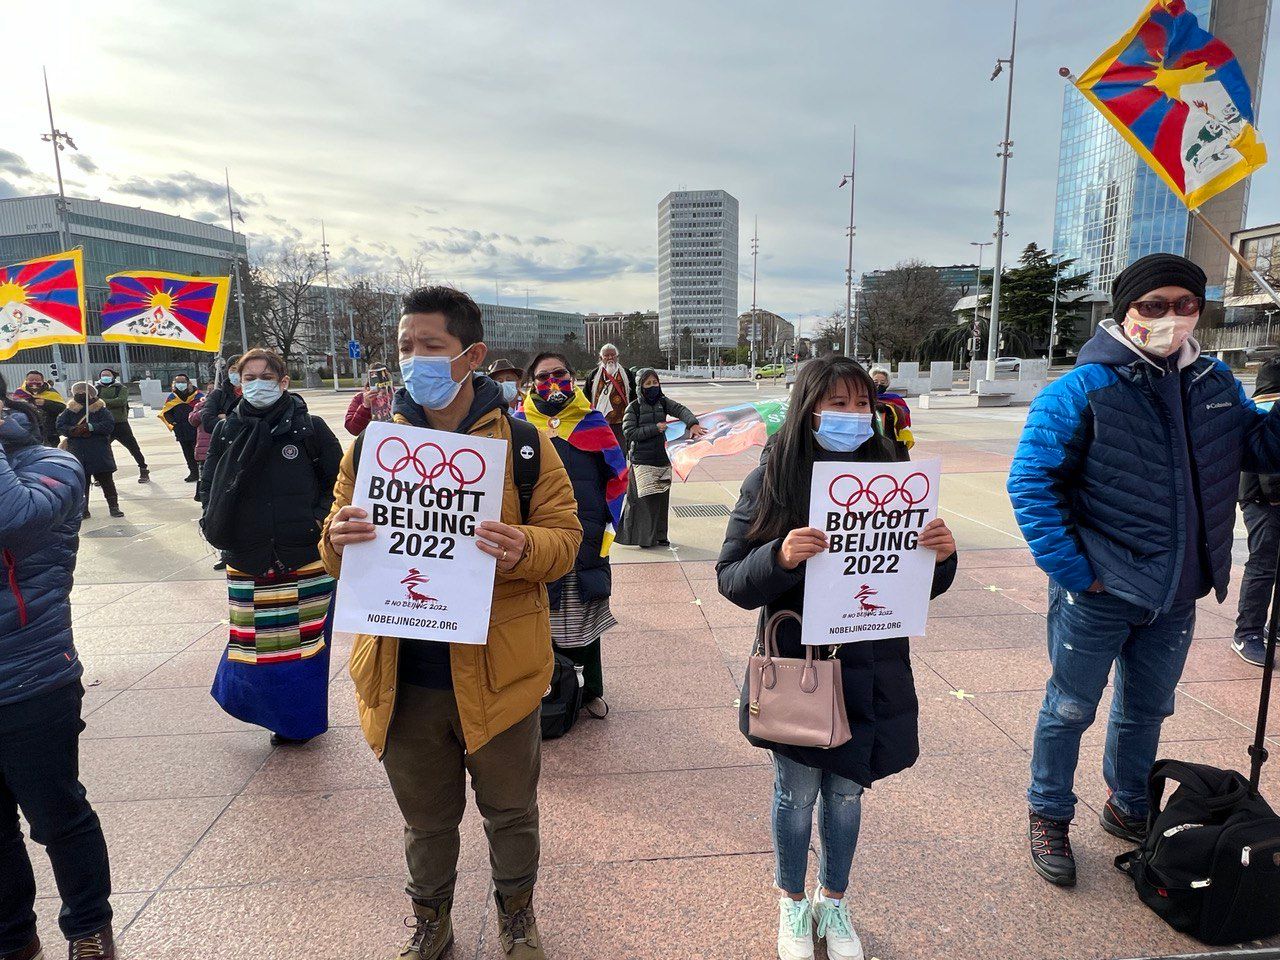 members of the Tibetan community of Switzerland Liechtenstein gathered in front of the UN Human Rights Council in protest against the winter Olympic games in Beijing. 2 Tibetan Communities in Switzerland and Germany Call for Diplomatic Boycott of Beijing Olympics 2022